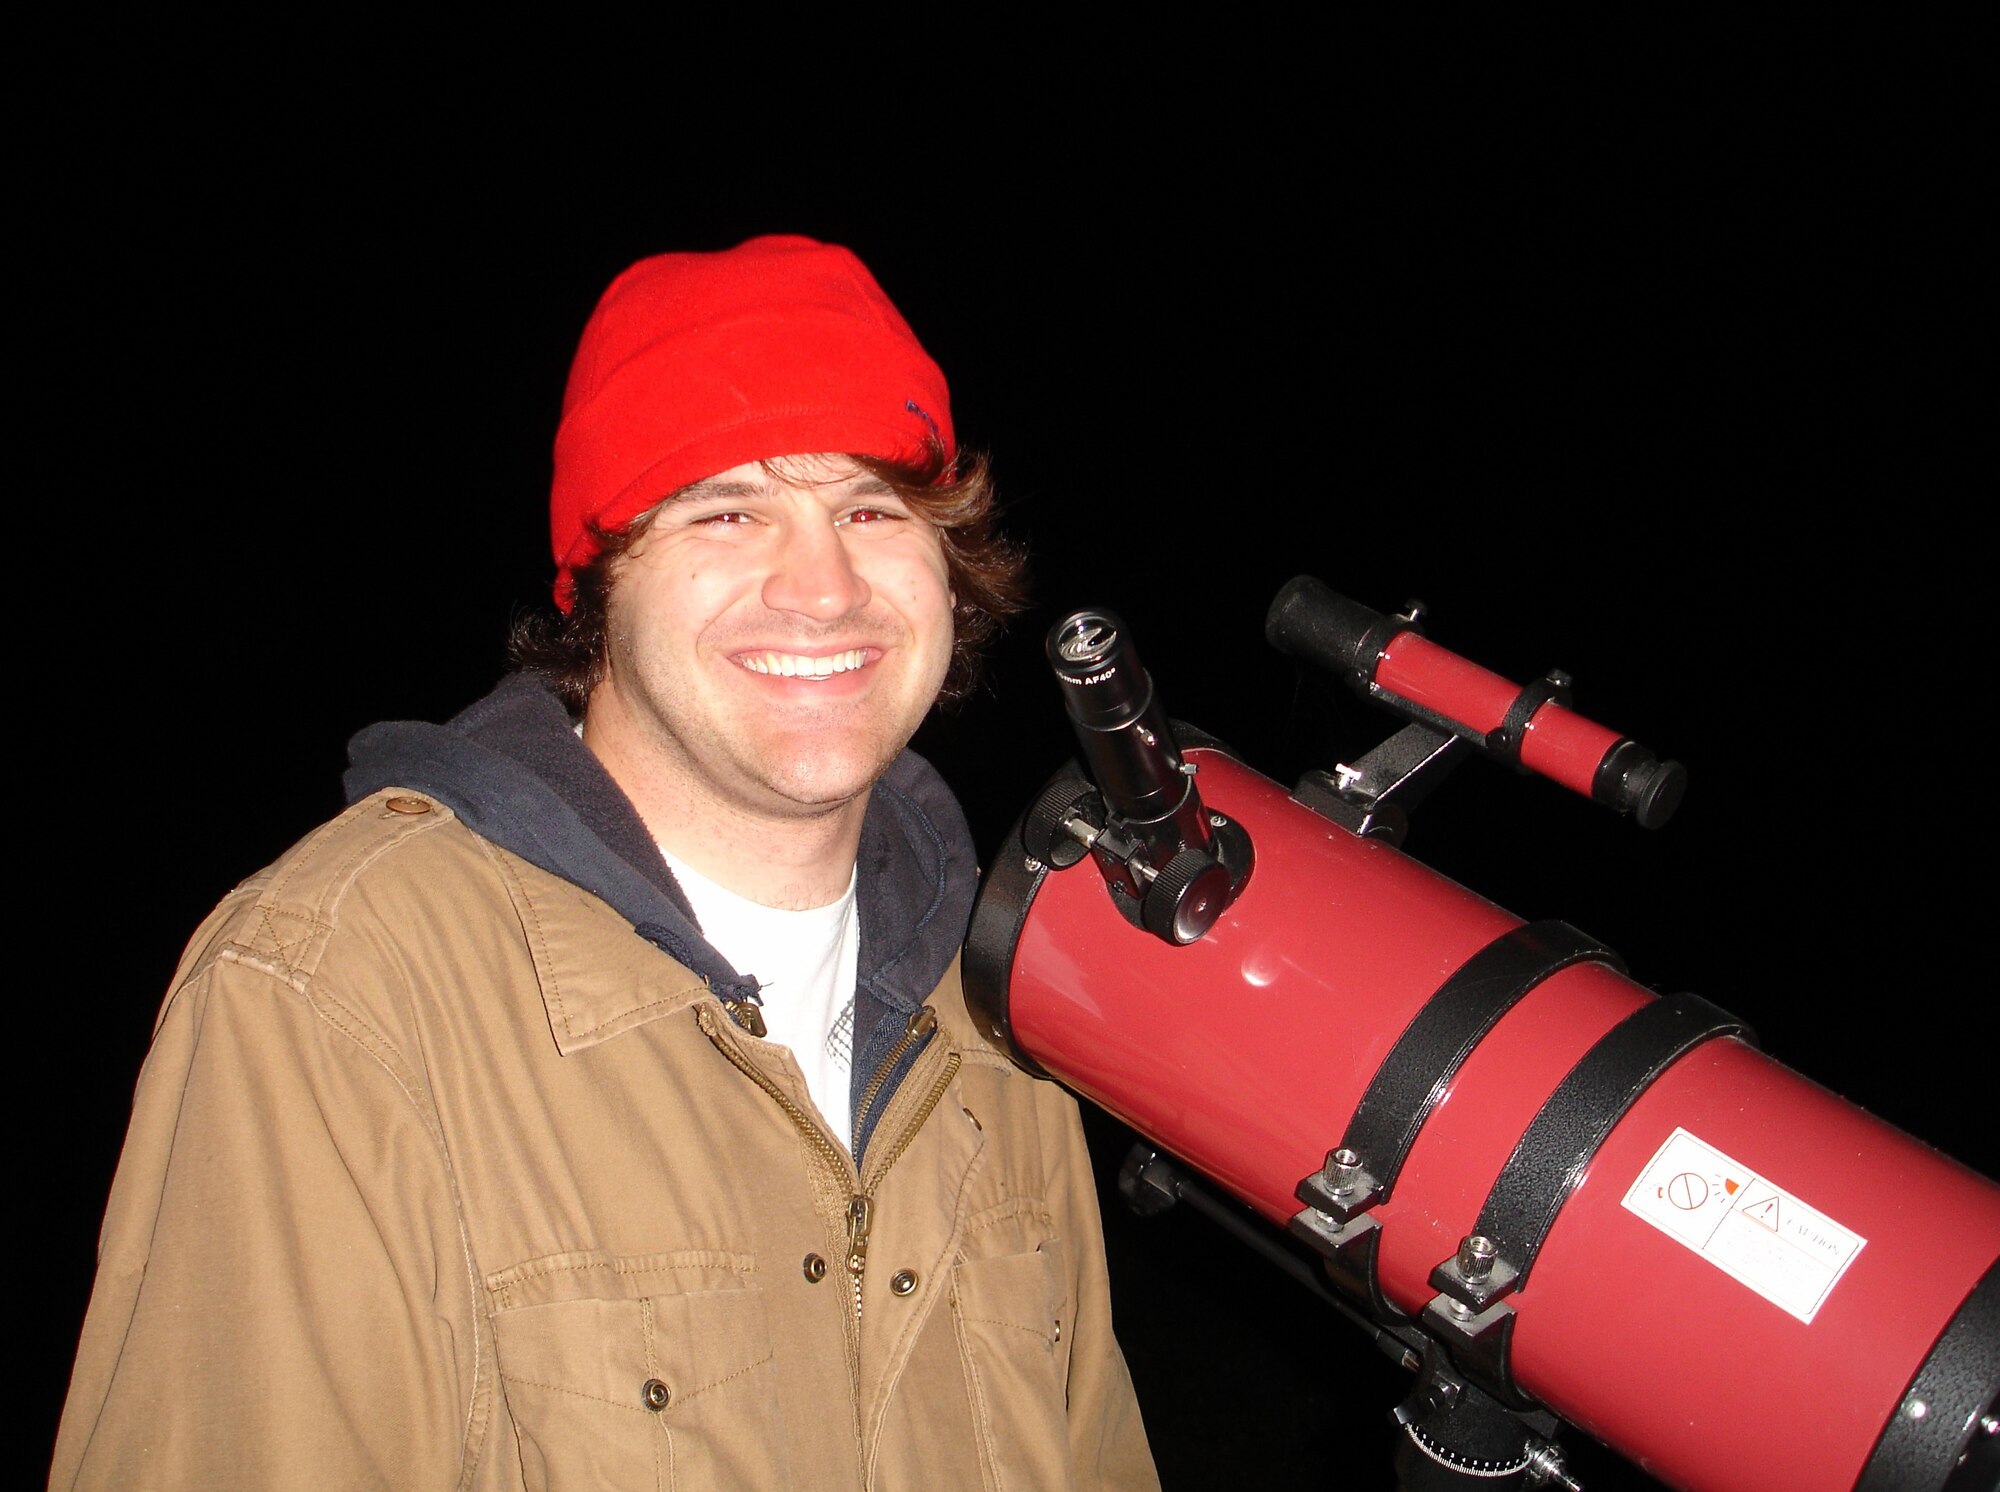 Gary Hammock, ATA engineering analyst, stands with his 150-millimeter diameter, 750-millimeter focal length reflector telescope on his parents farm in Westmoreland, Tenn. The most interesting images he says he’s seen is the blurry elliptical shape of the Andromeda galaxy and clearly seeing the rings of Saturn. (Photo provided)